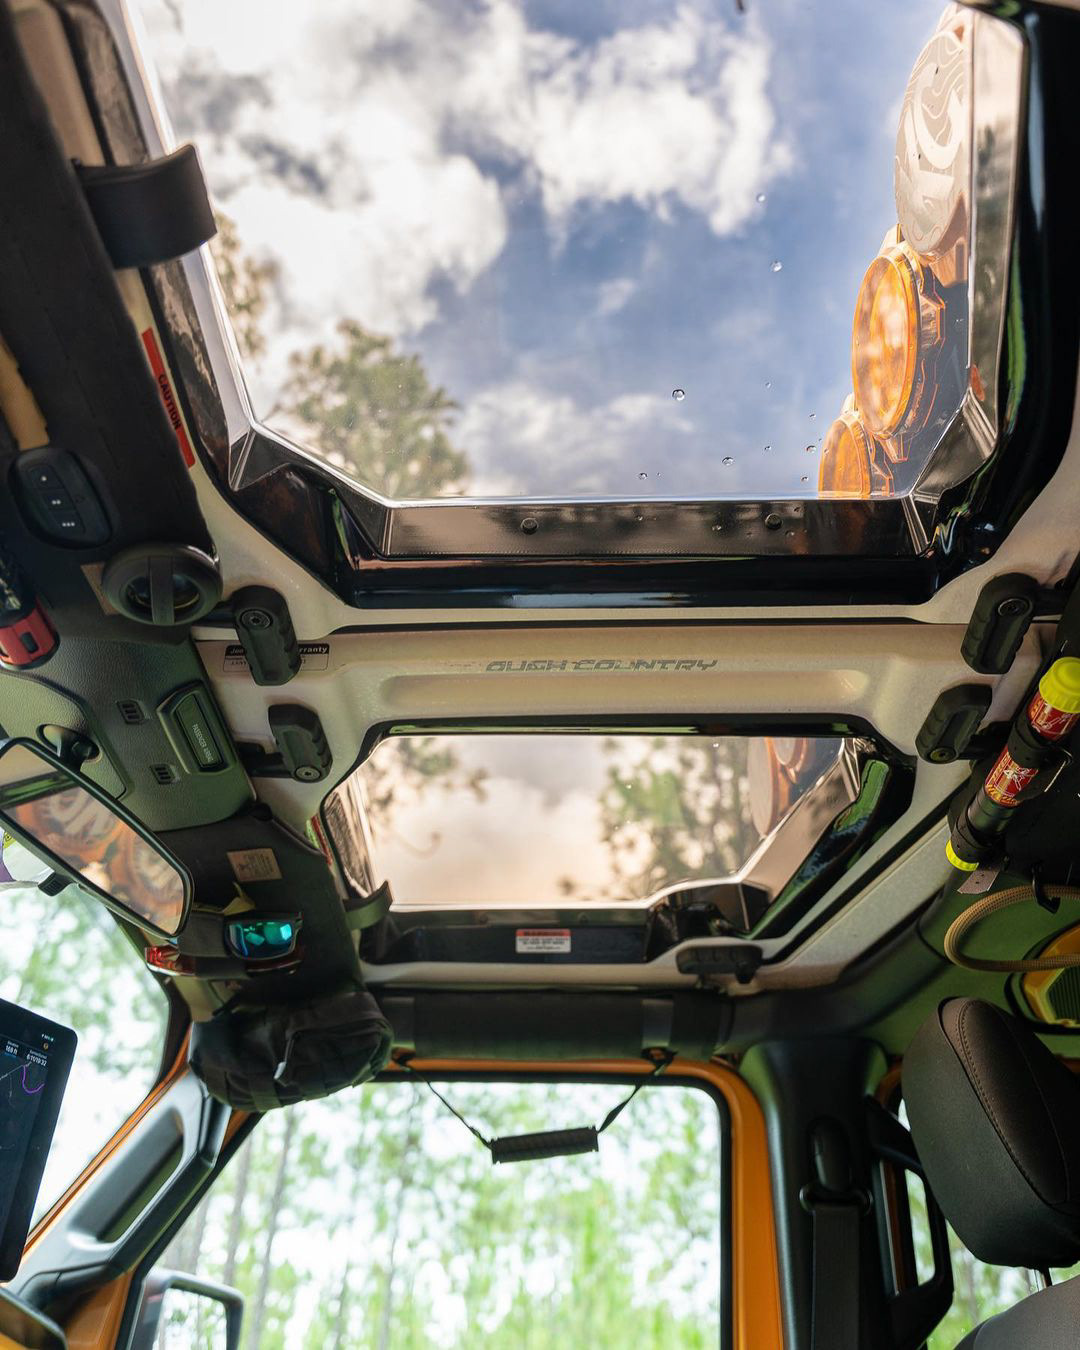 clear tops freedom top jeep jeep panels jeep safety Jeep Sunroof jeep tops Offroad sunroof explosion